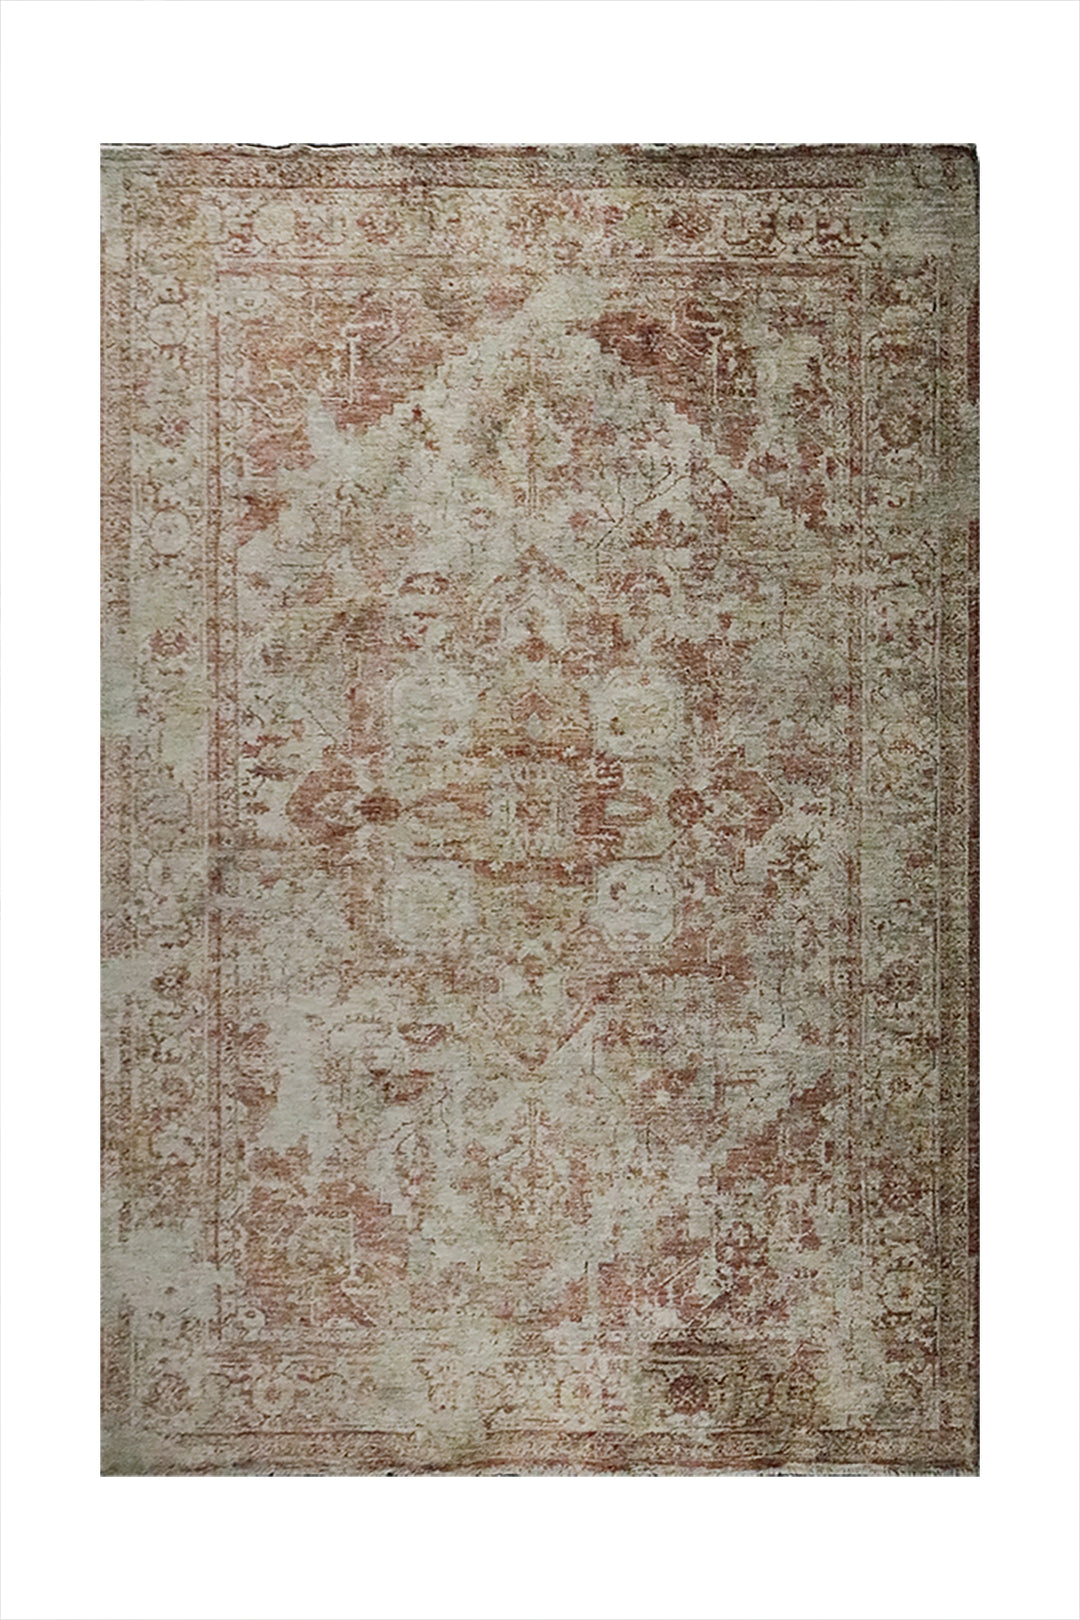 Turkish Modern Festival Plus Rug - 4.9 x 7.3 FT - Beige and Maroon - Superior Comfort, Modern Style Accent Rugs